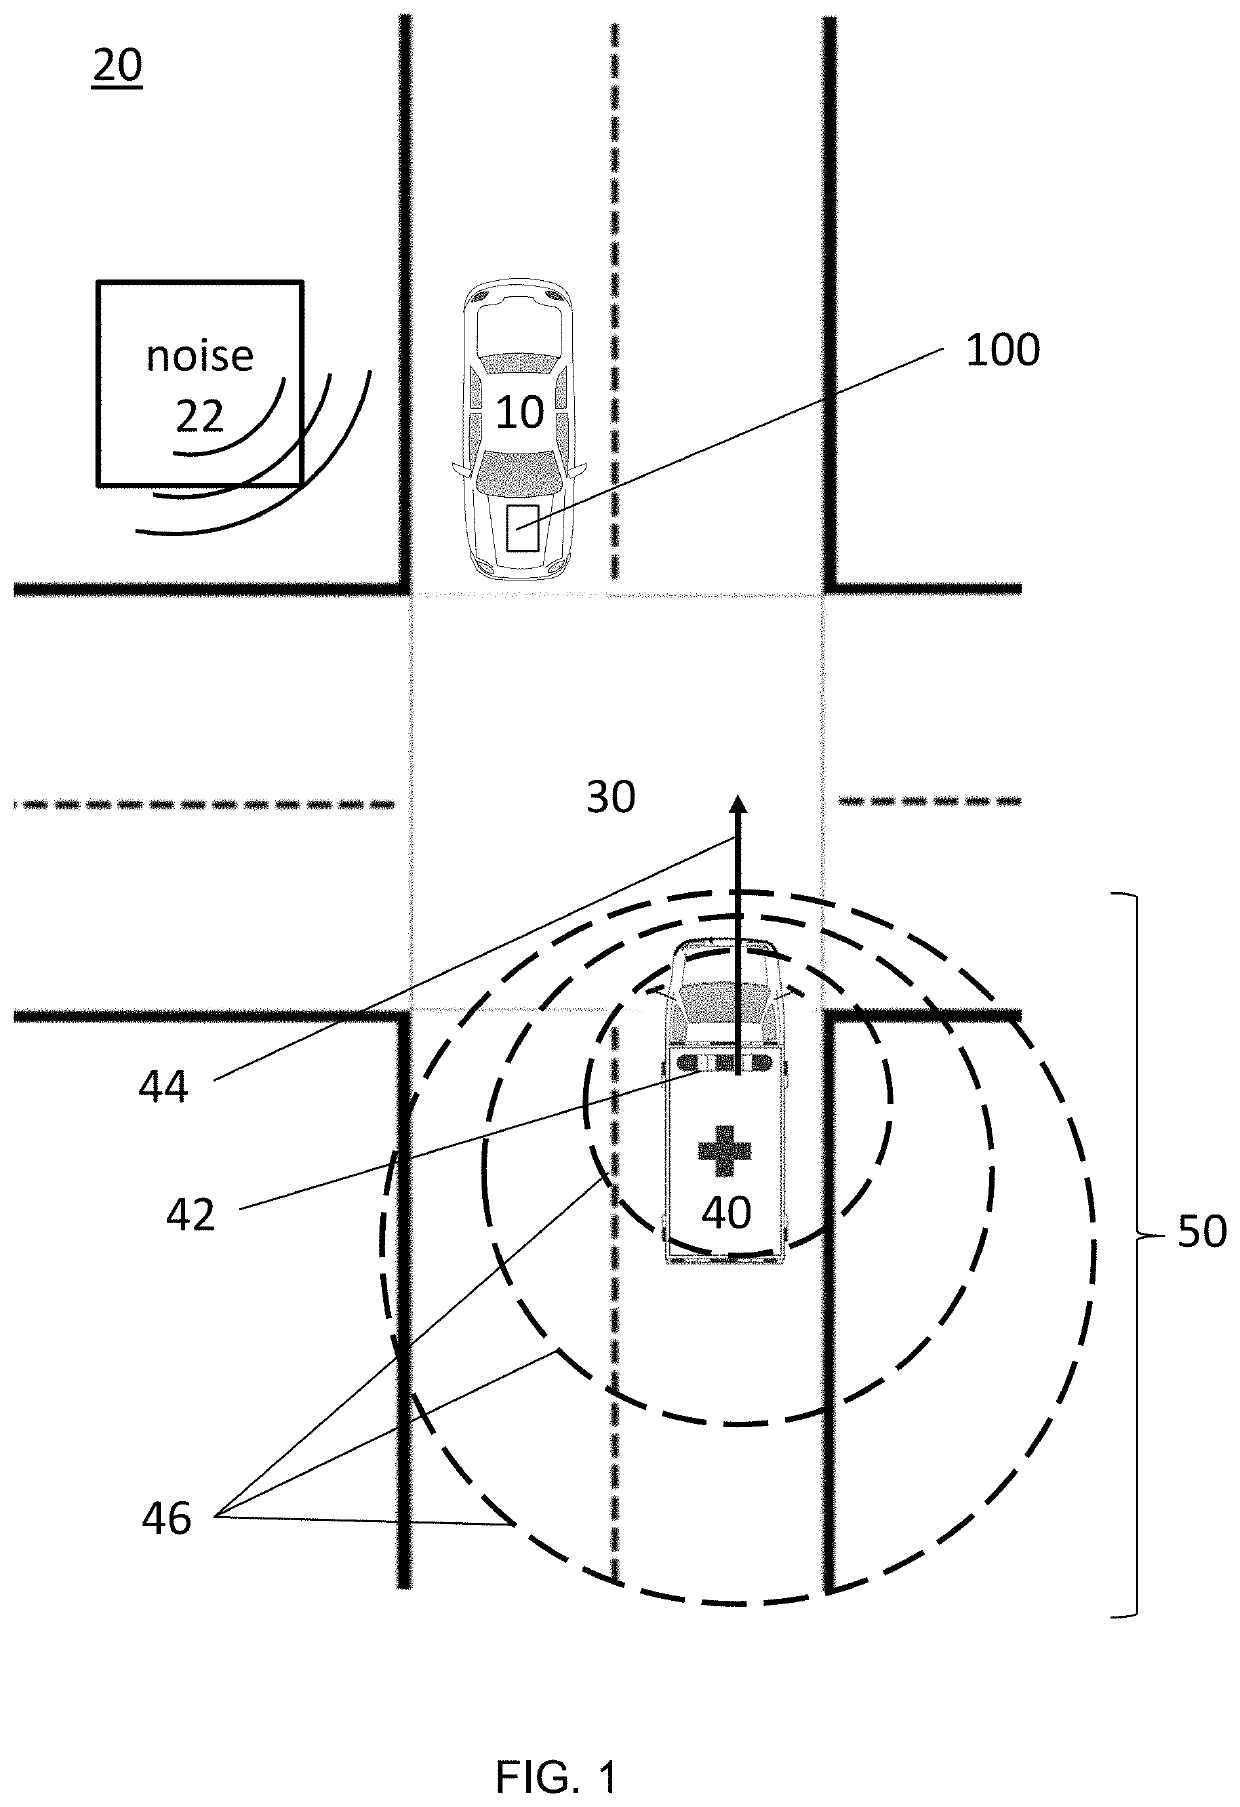 System and method for acoustic detection of emergency sirens